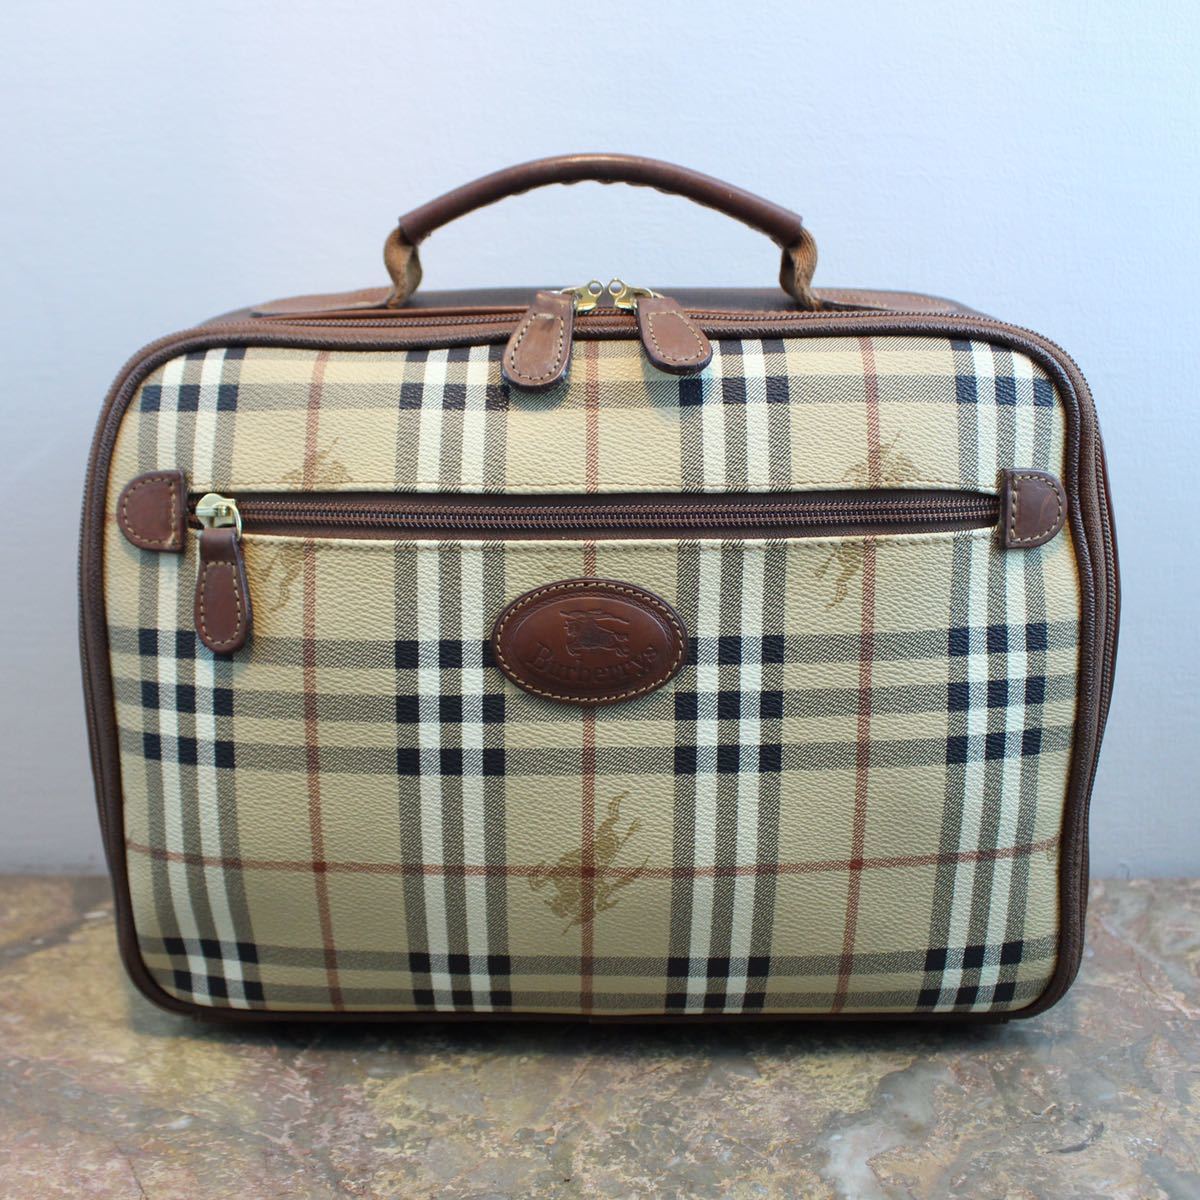 BURBERRYS CHECK PATTERNED HAND BAG MADE IN ITALY/ Burberry z в клетку ручная сумочка 